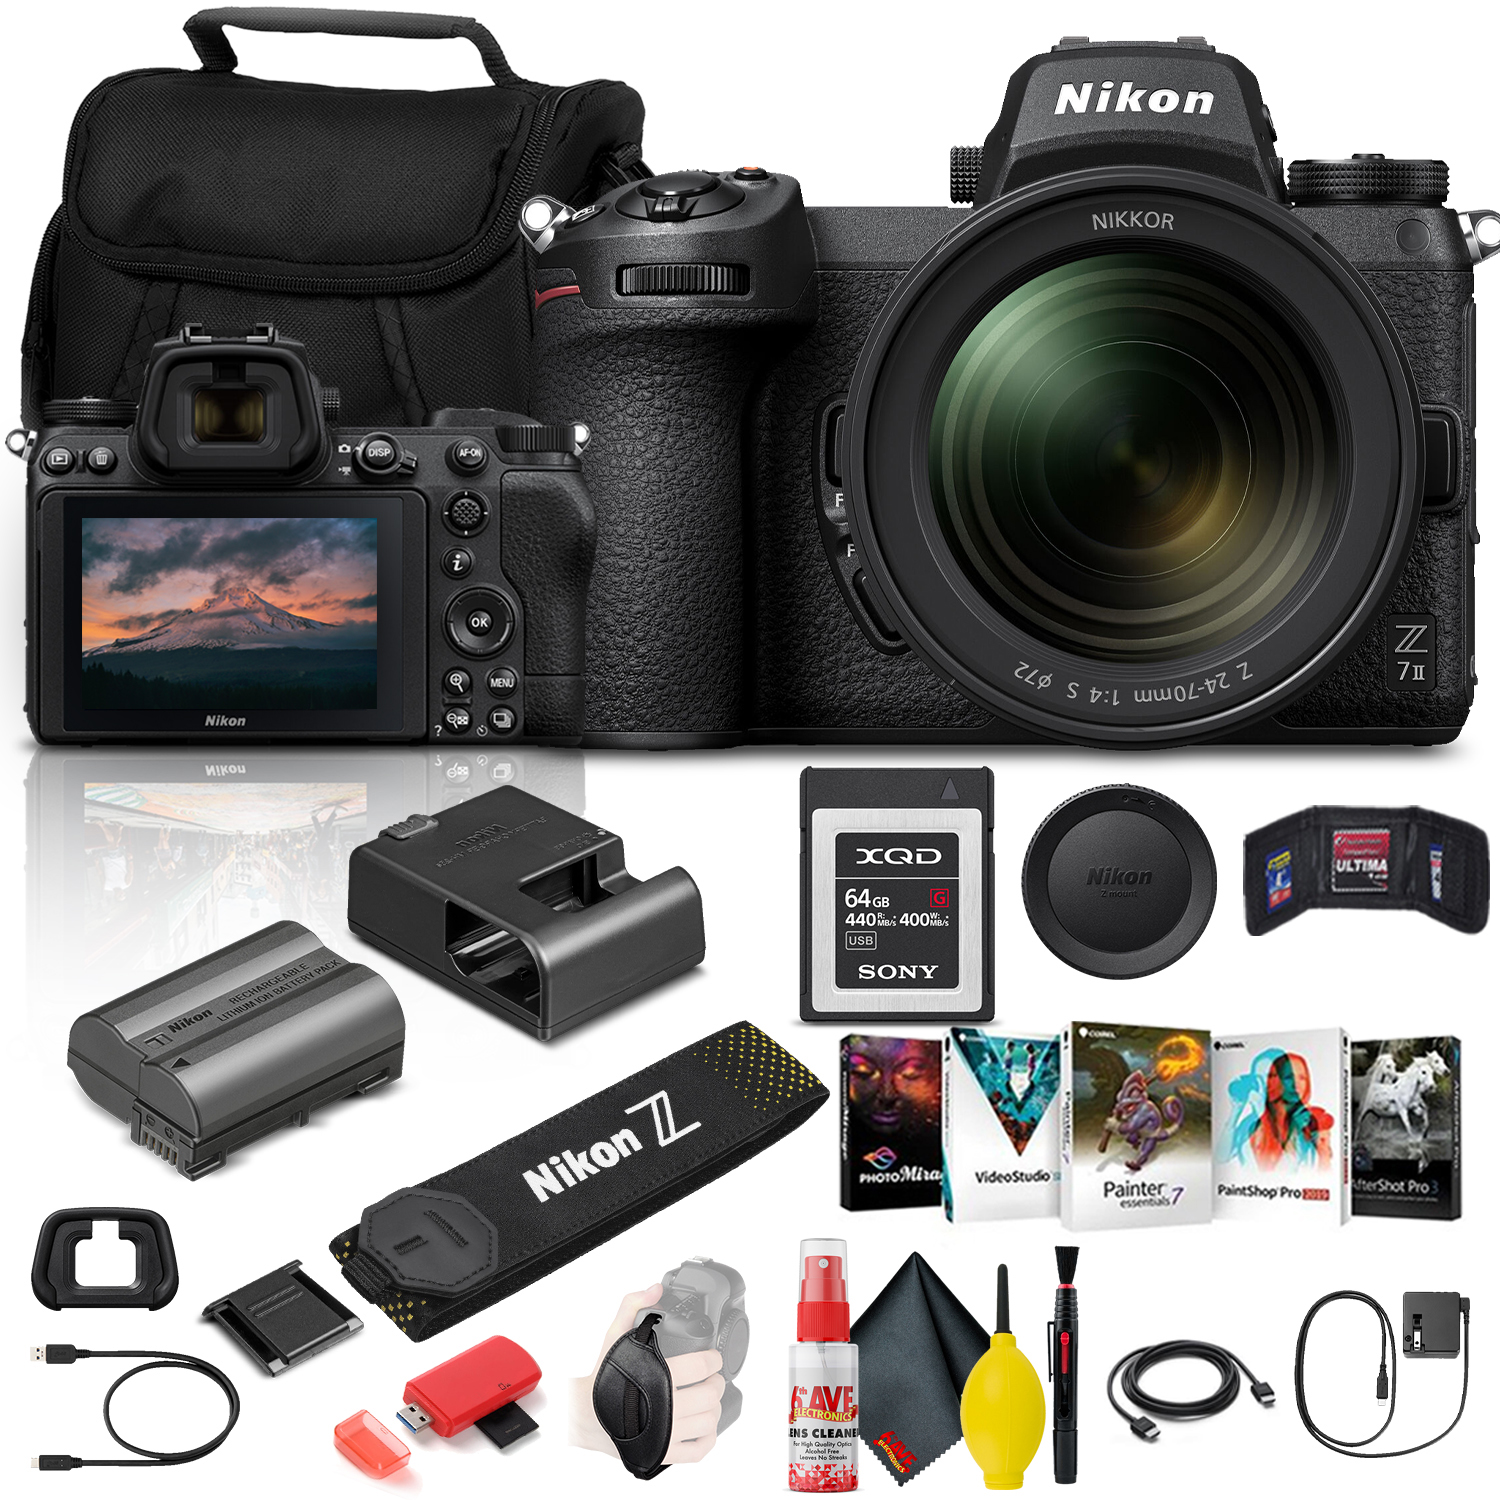 Nikon Z 7II Mirrorless Digital Camera 45.7MP with 24-70mm f/4 Lens (1656) + 64GB XQD Card + Corel Photo Software + Case + HDMI Cable + Card Reader + Cleaning Set + More - International Model - image 1 of 7